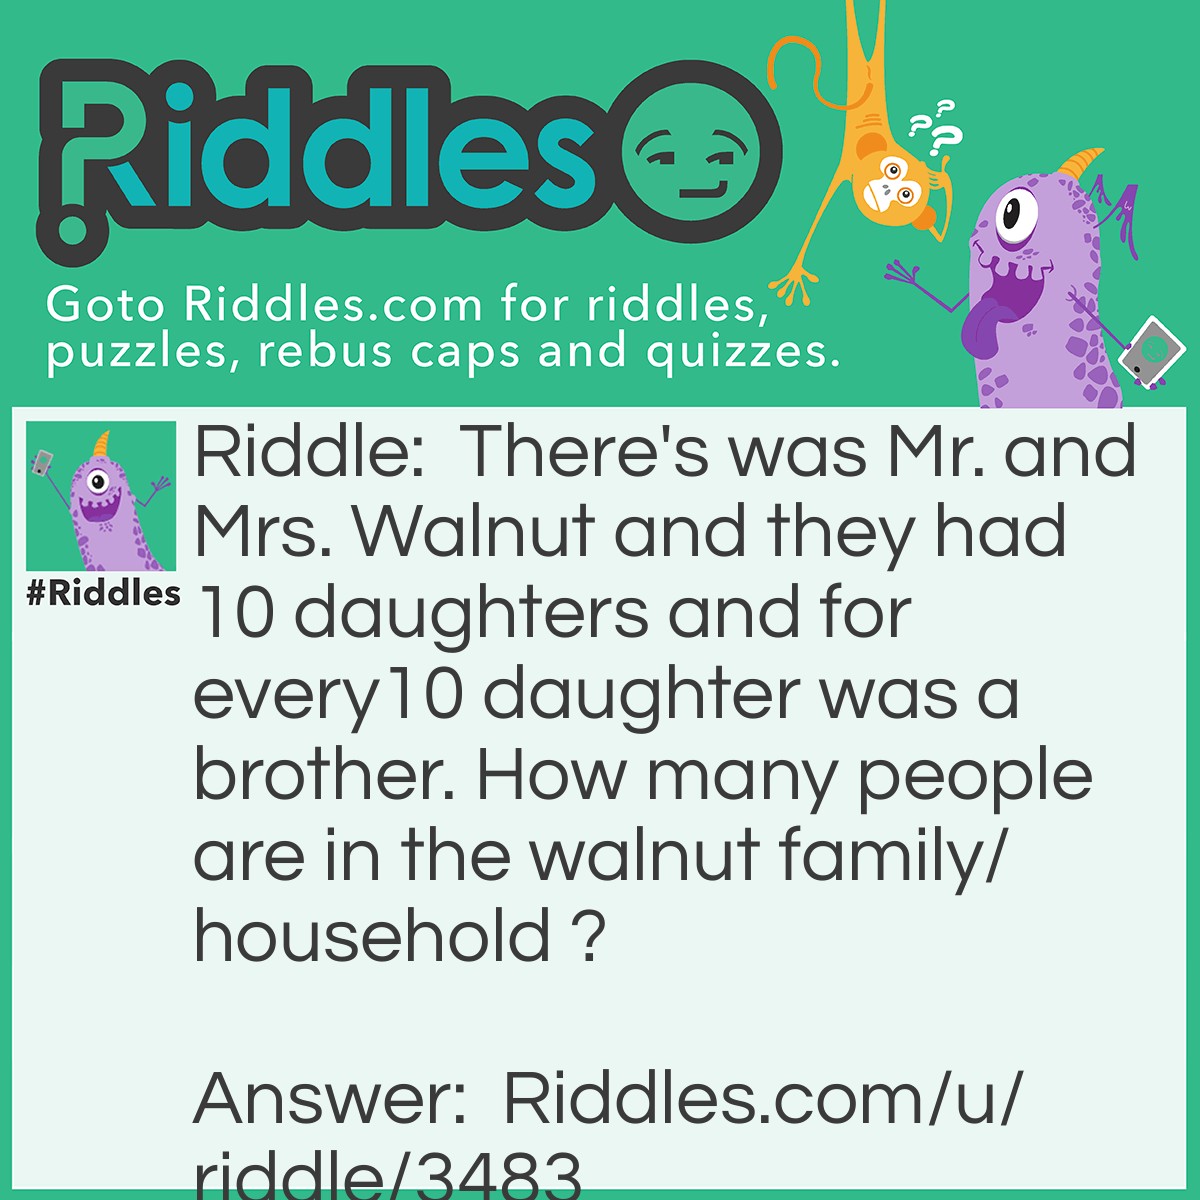 Riddle: There's was Mr. and Mrs. Walnut and they had 10 daughters and for every10 daughter was a brother. How many people are in the walnut family/household ? Answer: There are 13 people in the household/ family.